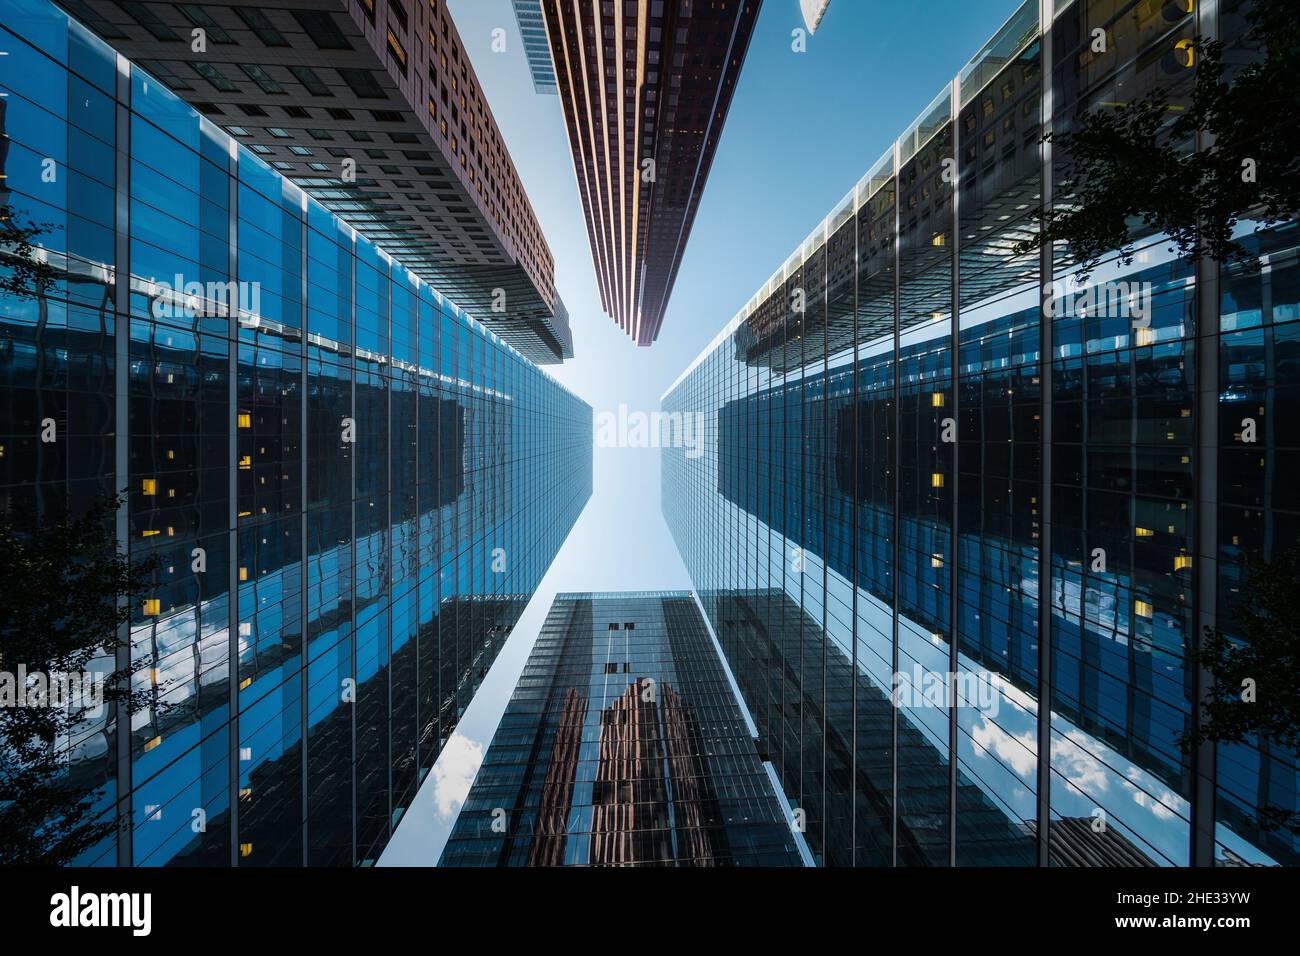 Business and finance concept, looking up at modern skyscrapers in the financial district of Toronto in Ontario, Canada. Stock Photo